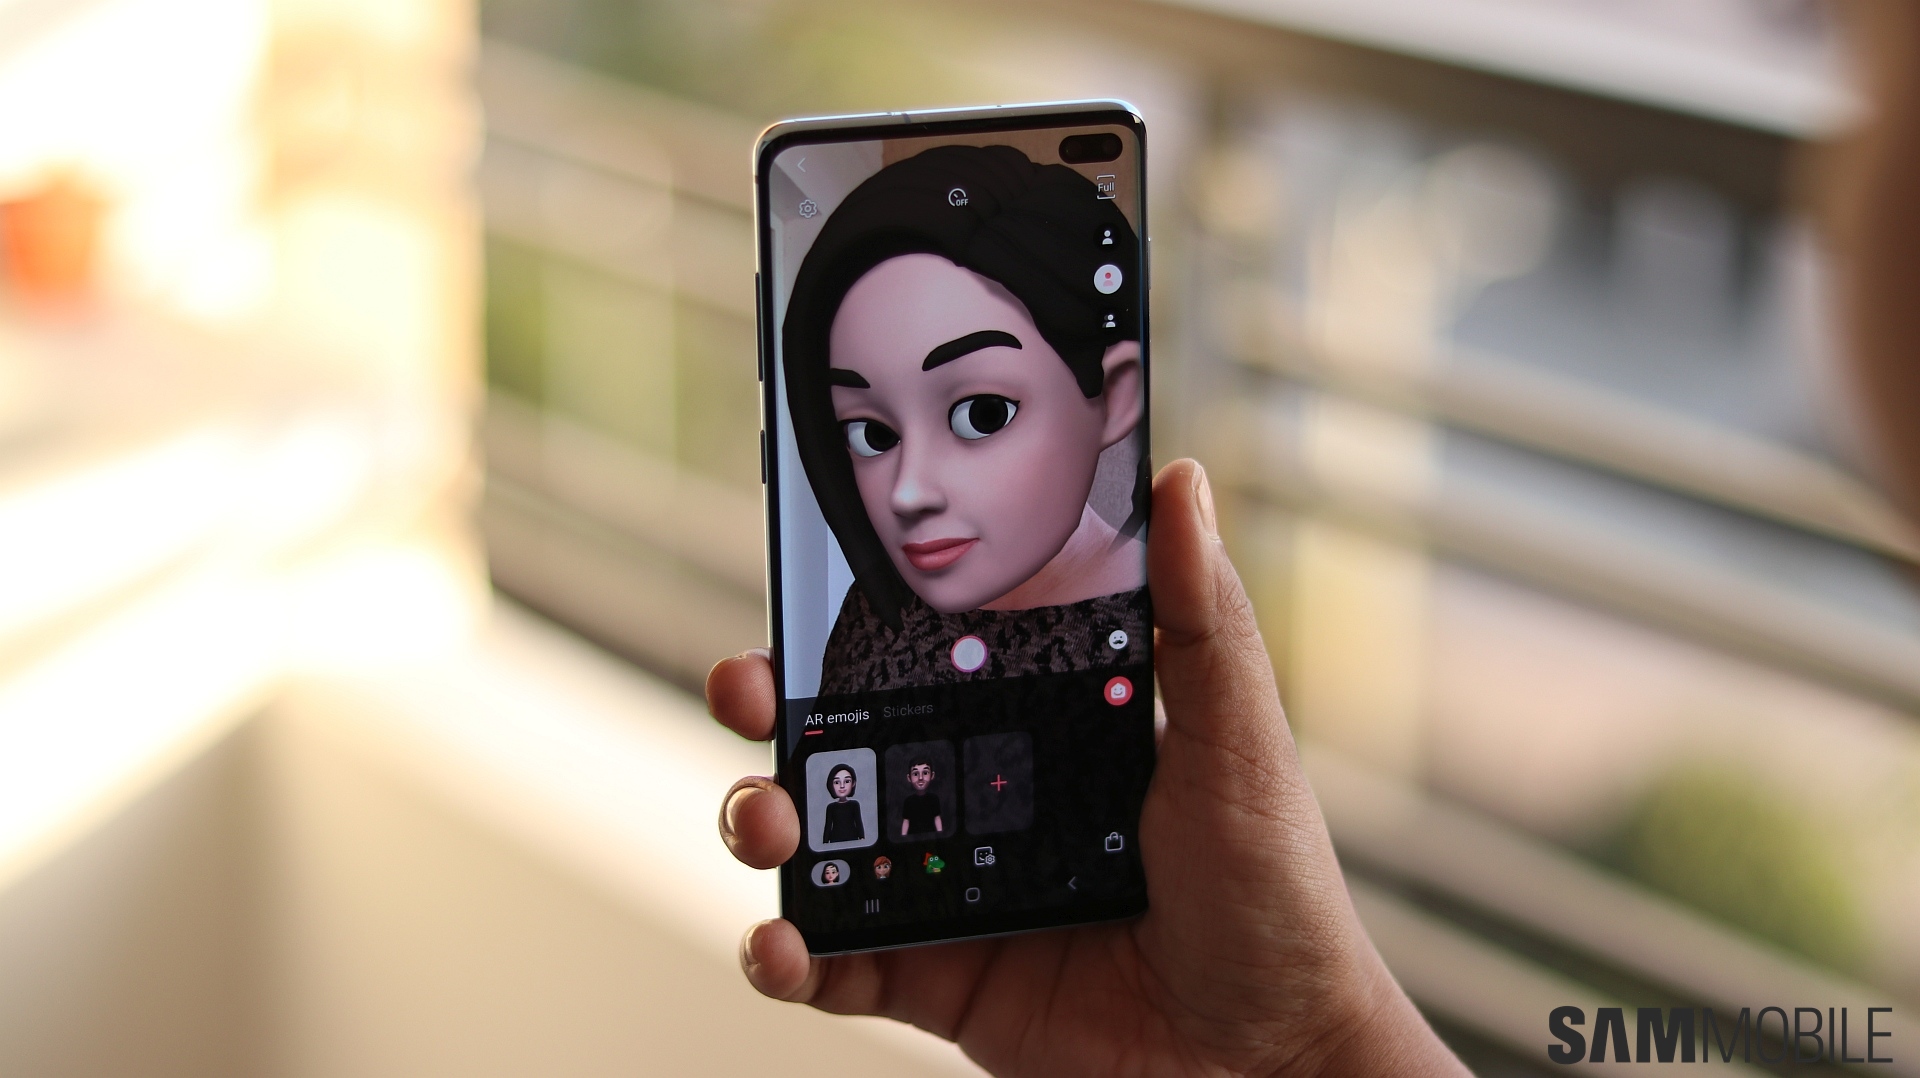 Galaxy S10 Ar Emojis Can Reflect Your Body Movements In Real Time